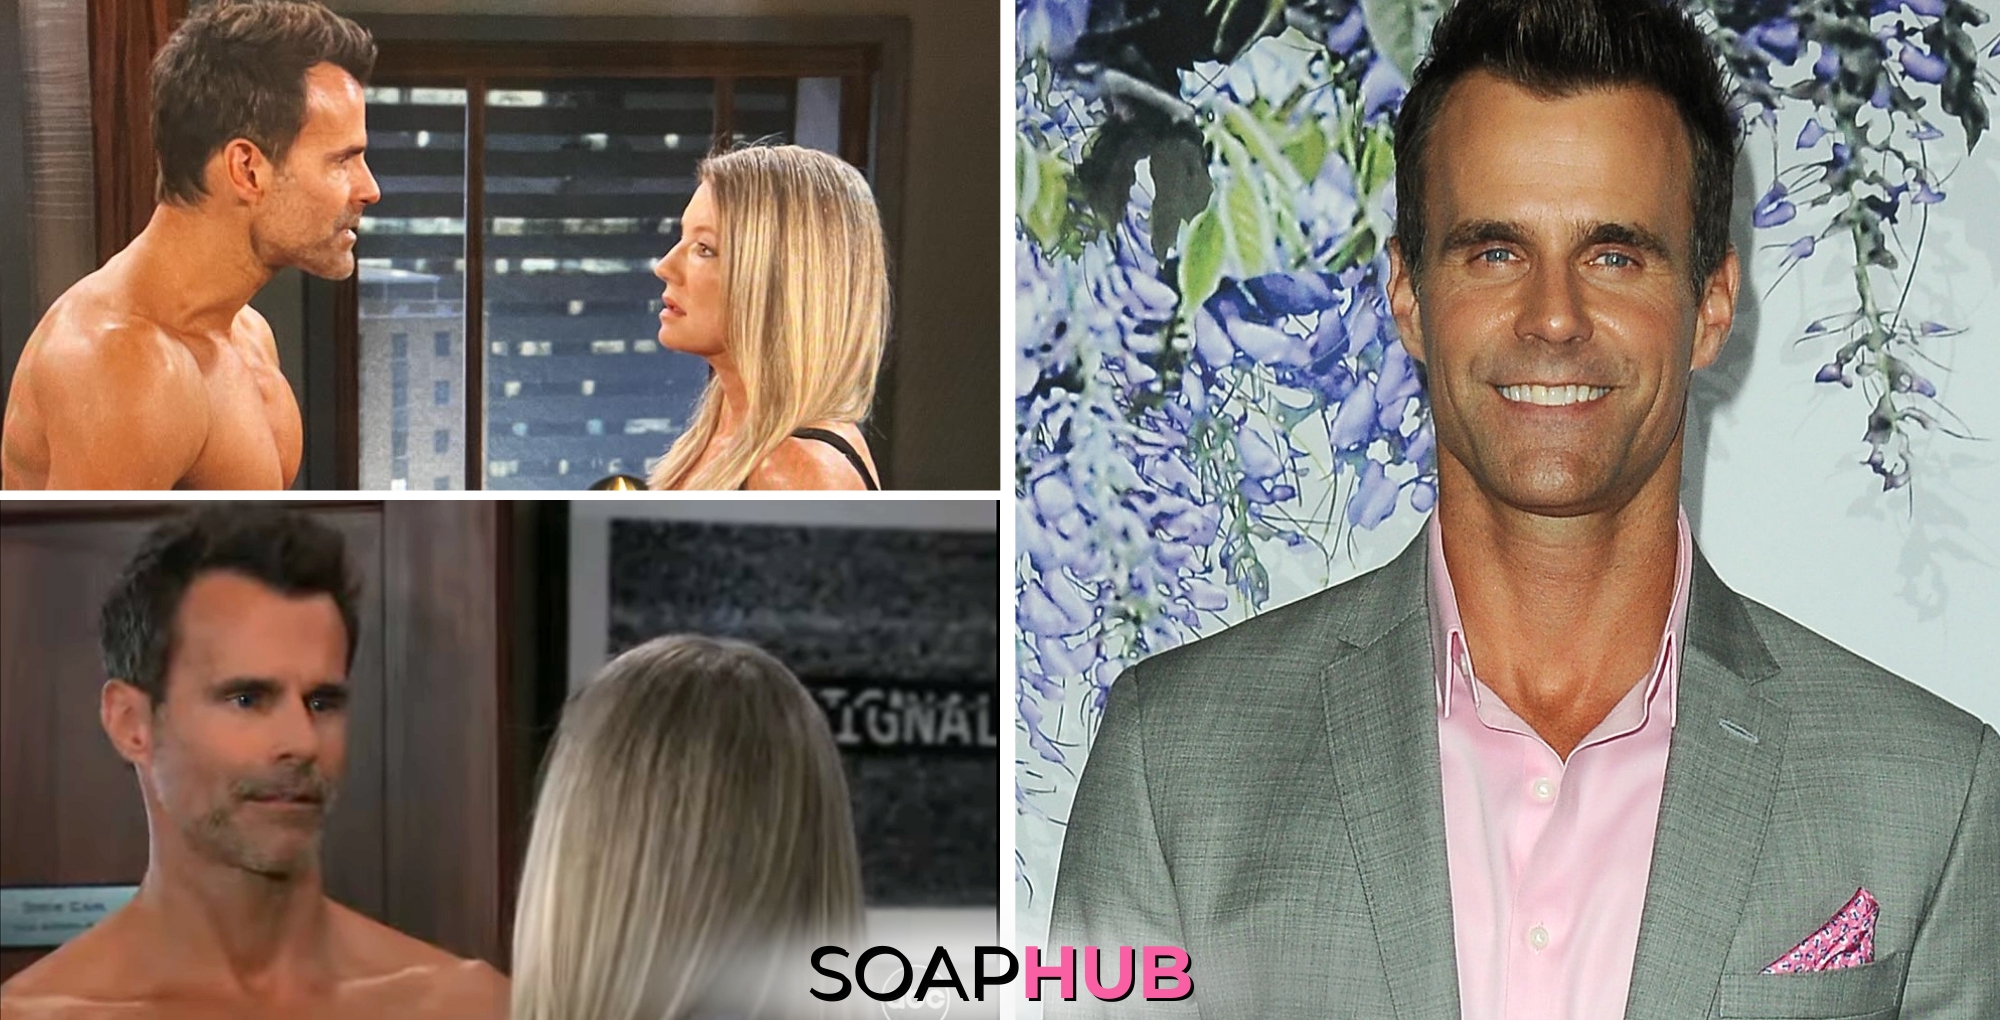 Collage featuring General Hospital's Cameron Mathison and Tuesday, April 9 episode with soap hub logo on the bottom